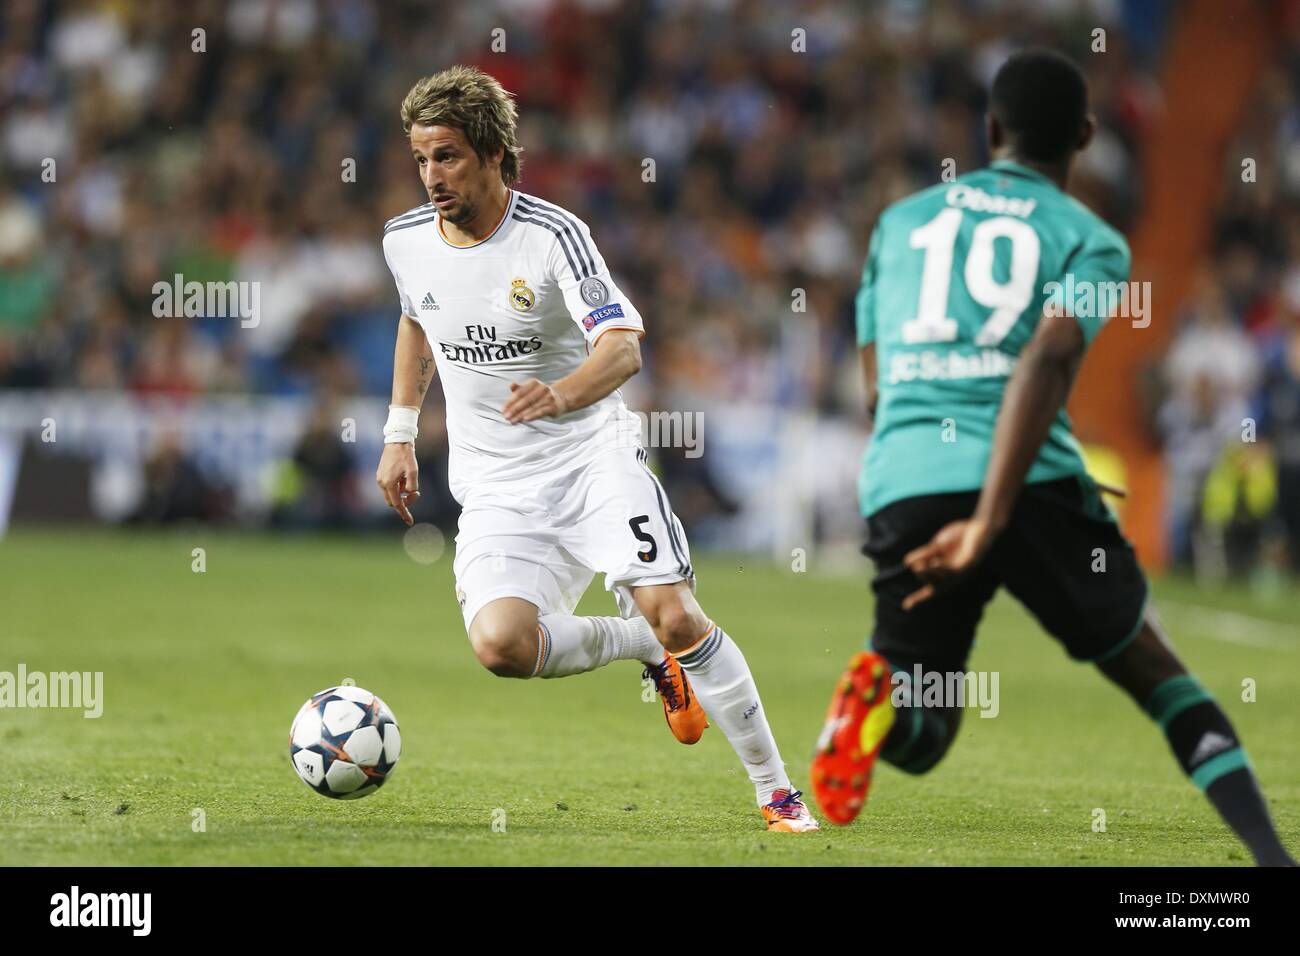 Madrid, Spain. 18th Mar, 2014. Fabio Coentrao (Real) Football/Soccer : UEFA Champions League match between Real Madrid and Schalke 04 at the Santiago Bernabeu Stadium in Madrid, Spain . © AFLO/Alamy Live News Stock Photo